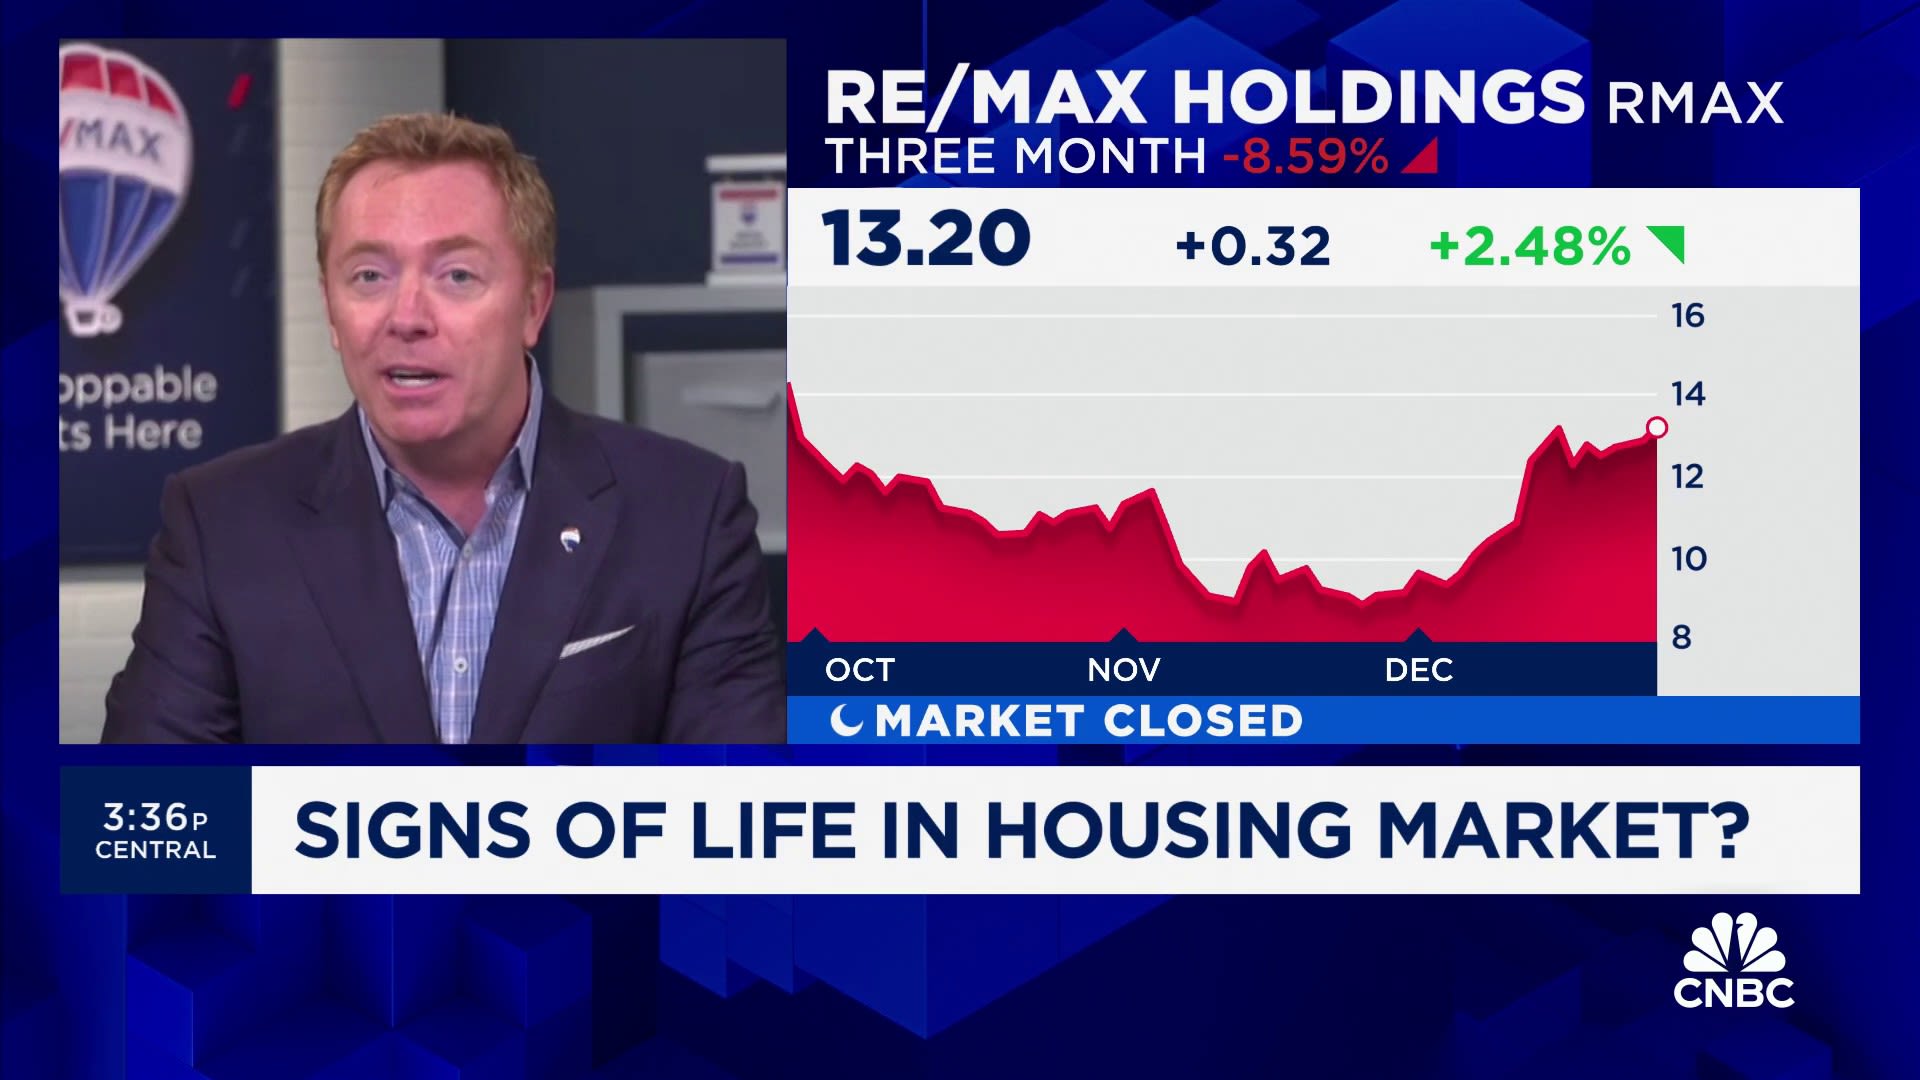 The U.S. is short 4.5 to 5 million homes, says Re/Max CEO Nick Bailey on housing demand